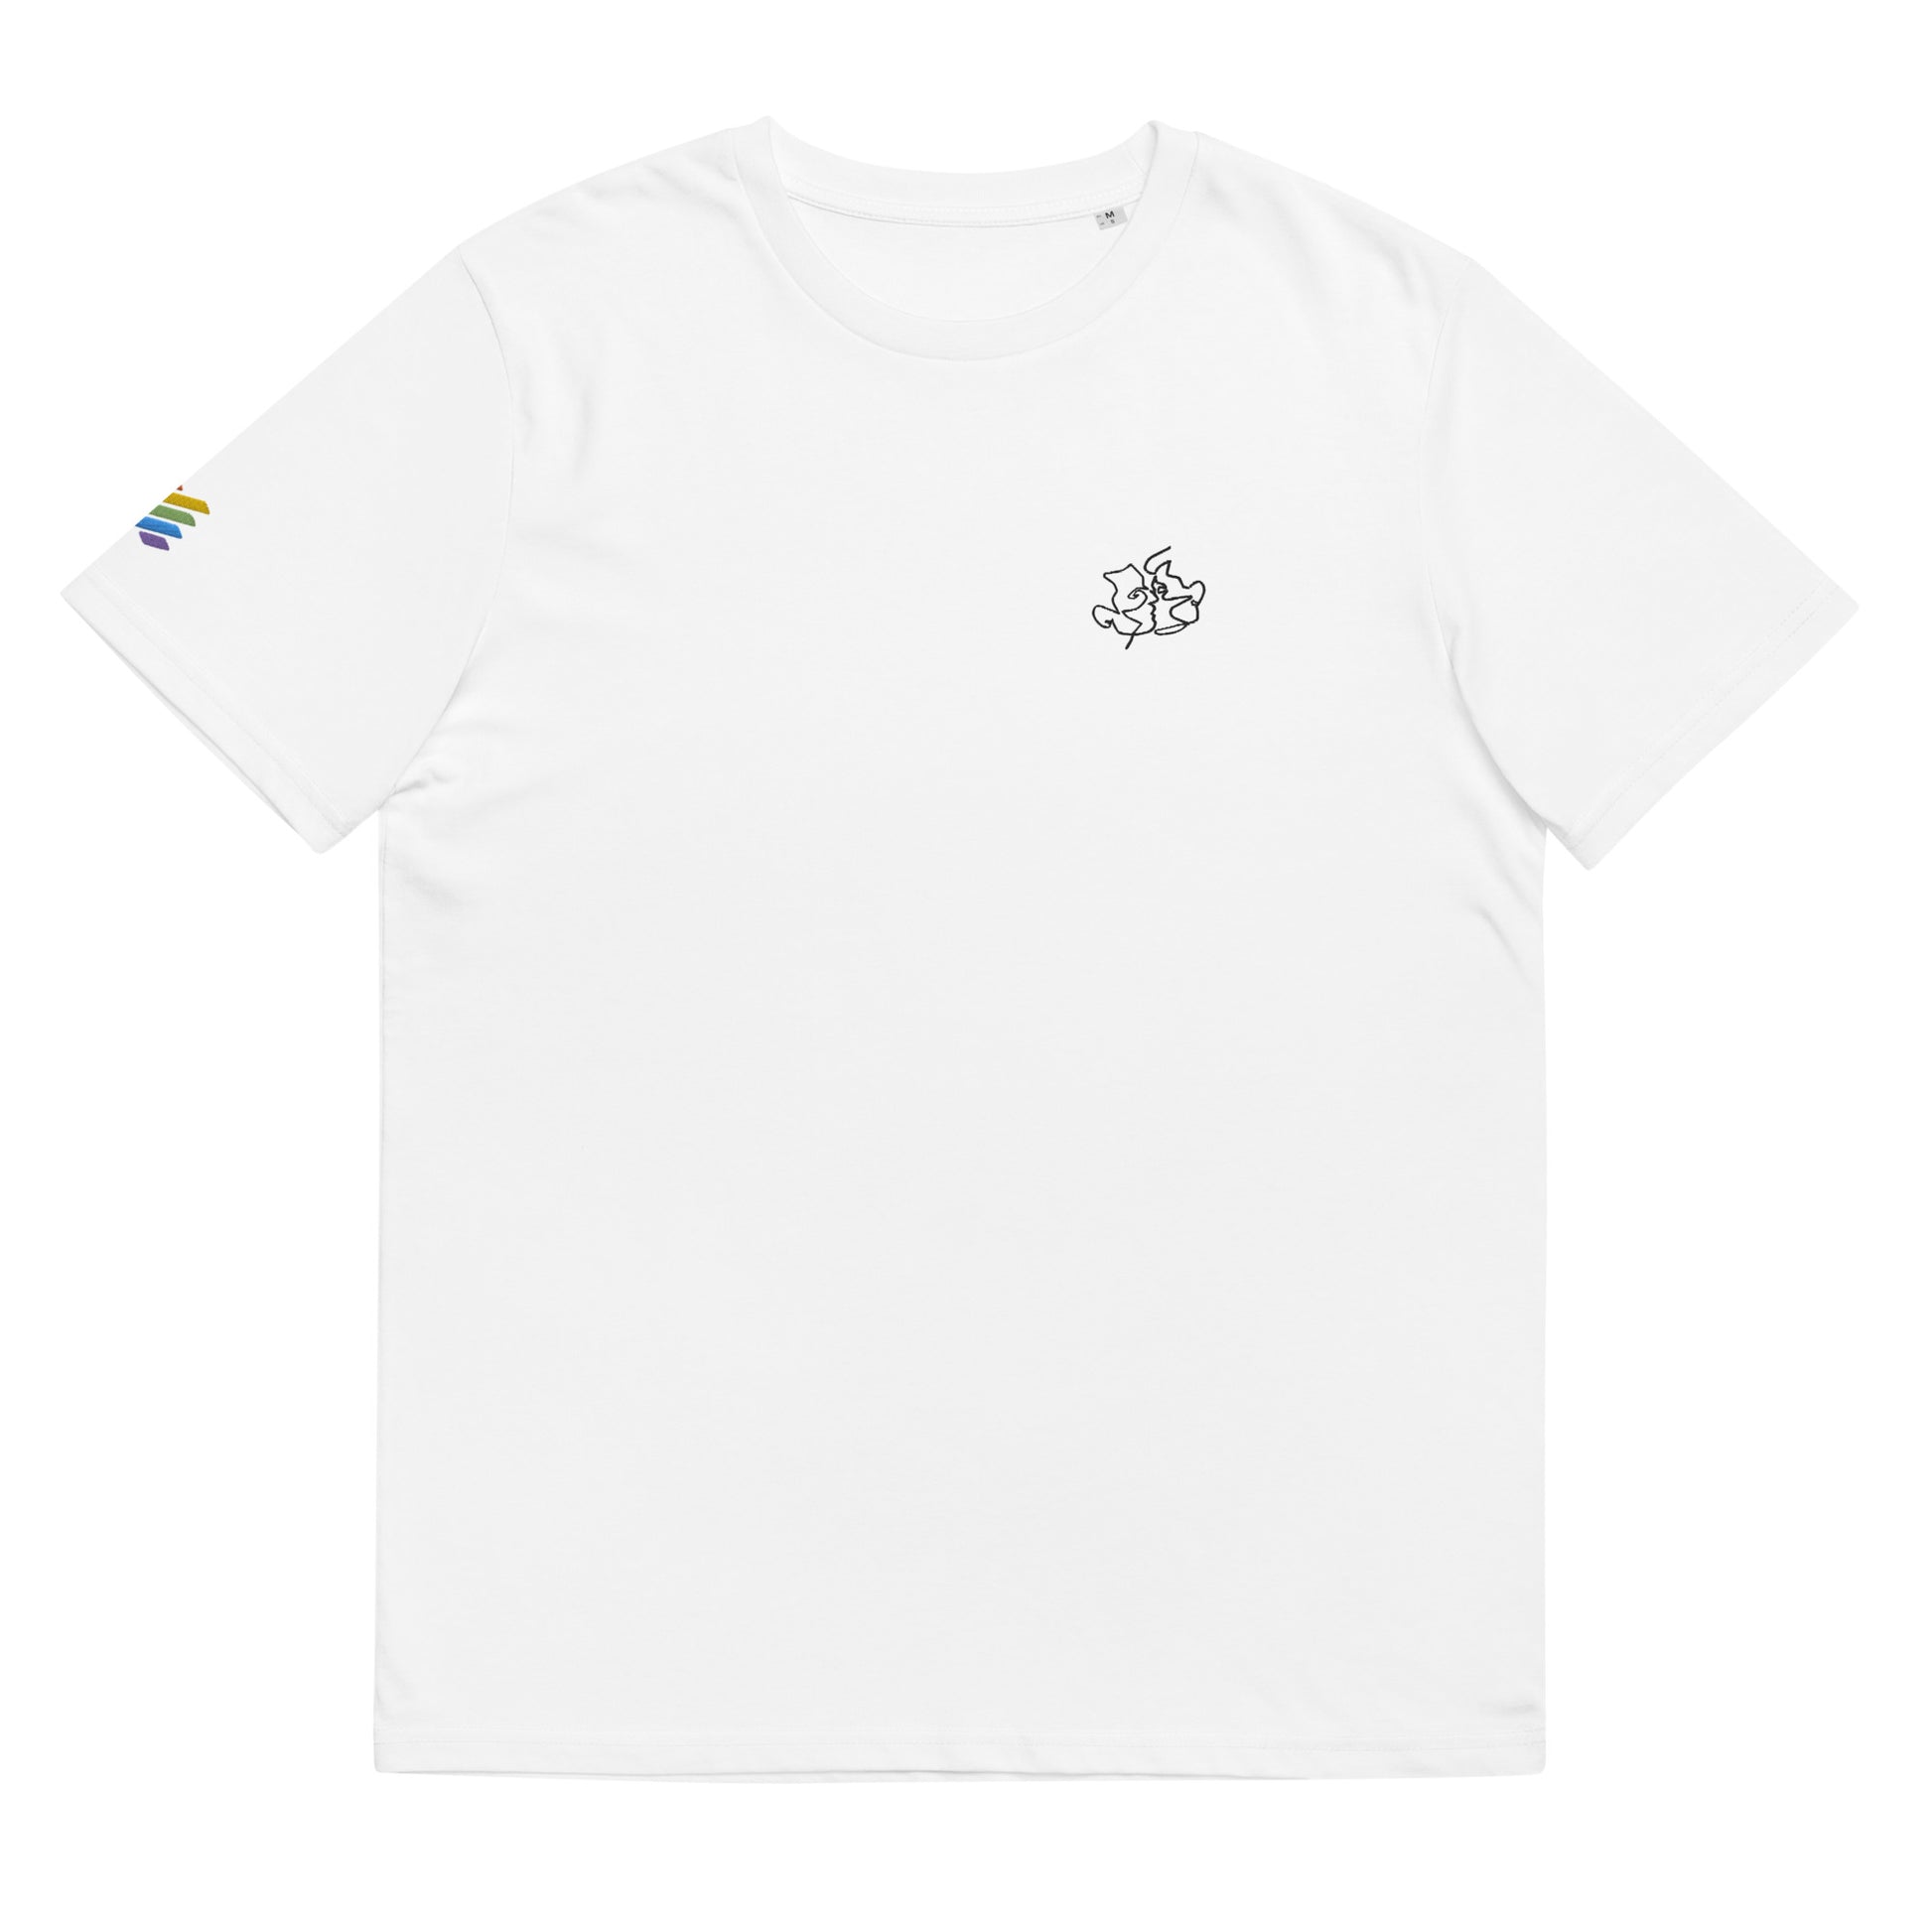 Fitted white organic cotton t-shirt with a small embroidered line art of two men kissing on the left chest, and an embroidered pride rainbow flag on the right sleeve. Available in sizes S to 3XL.